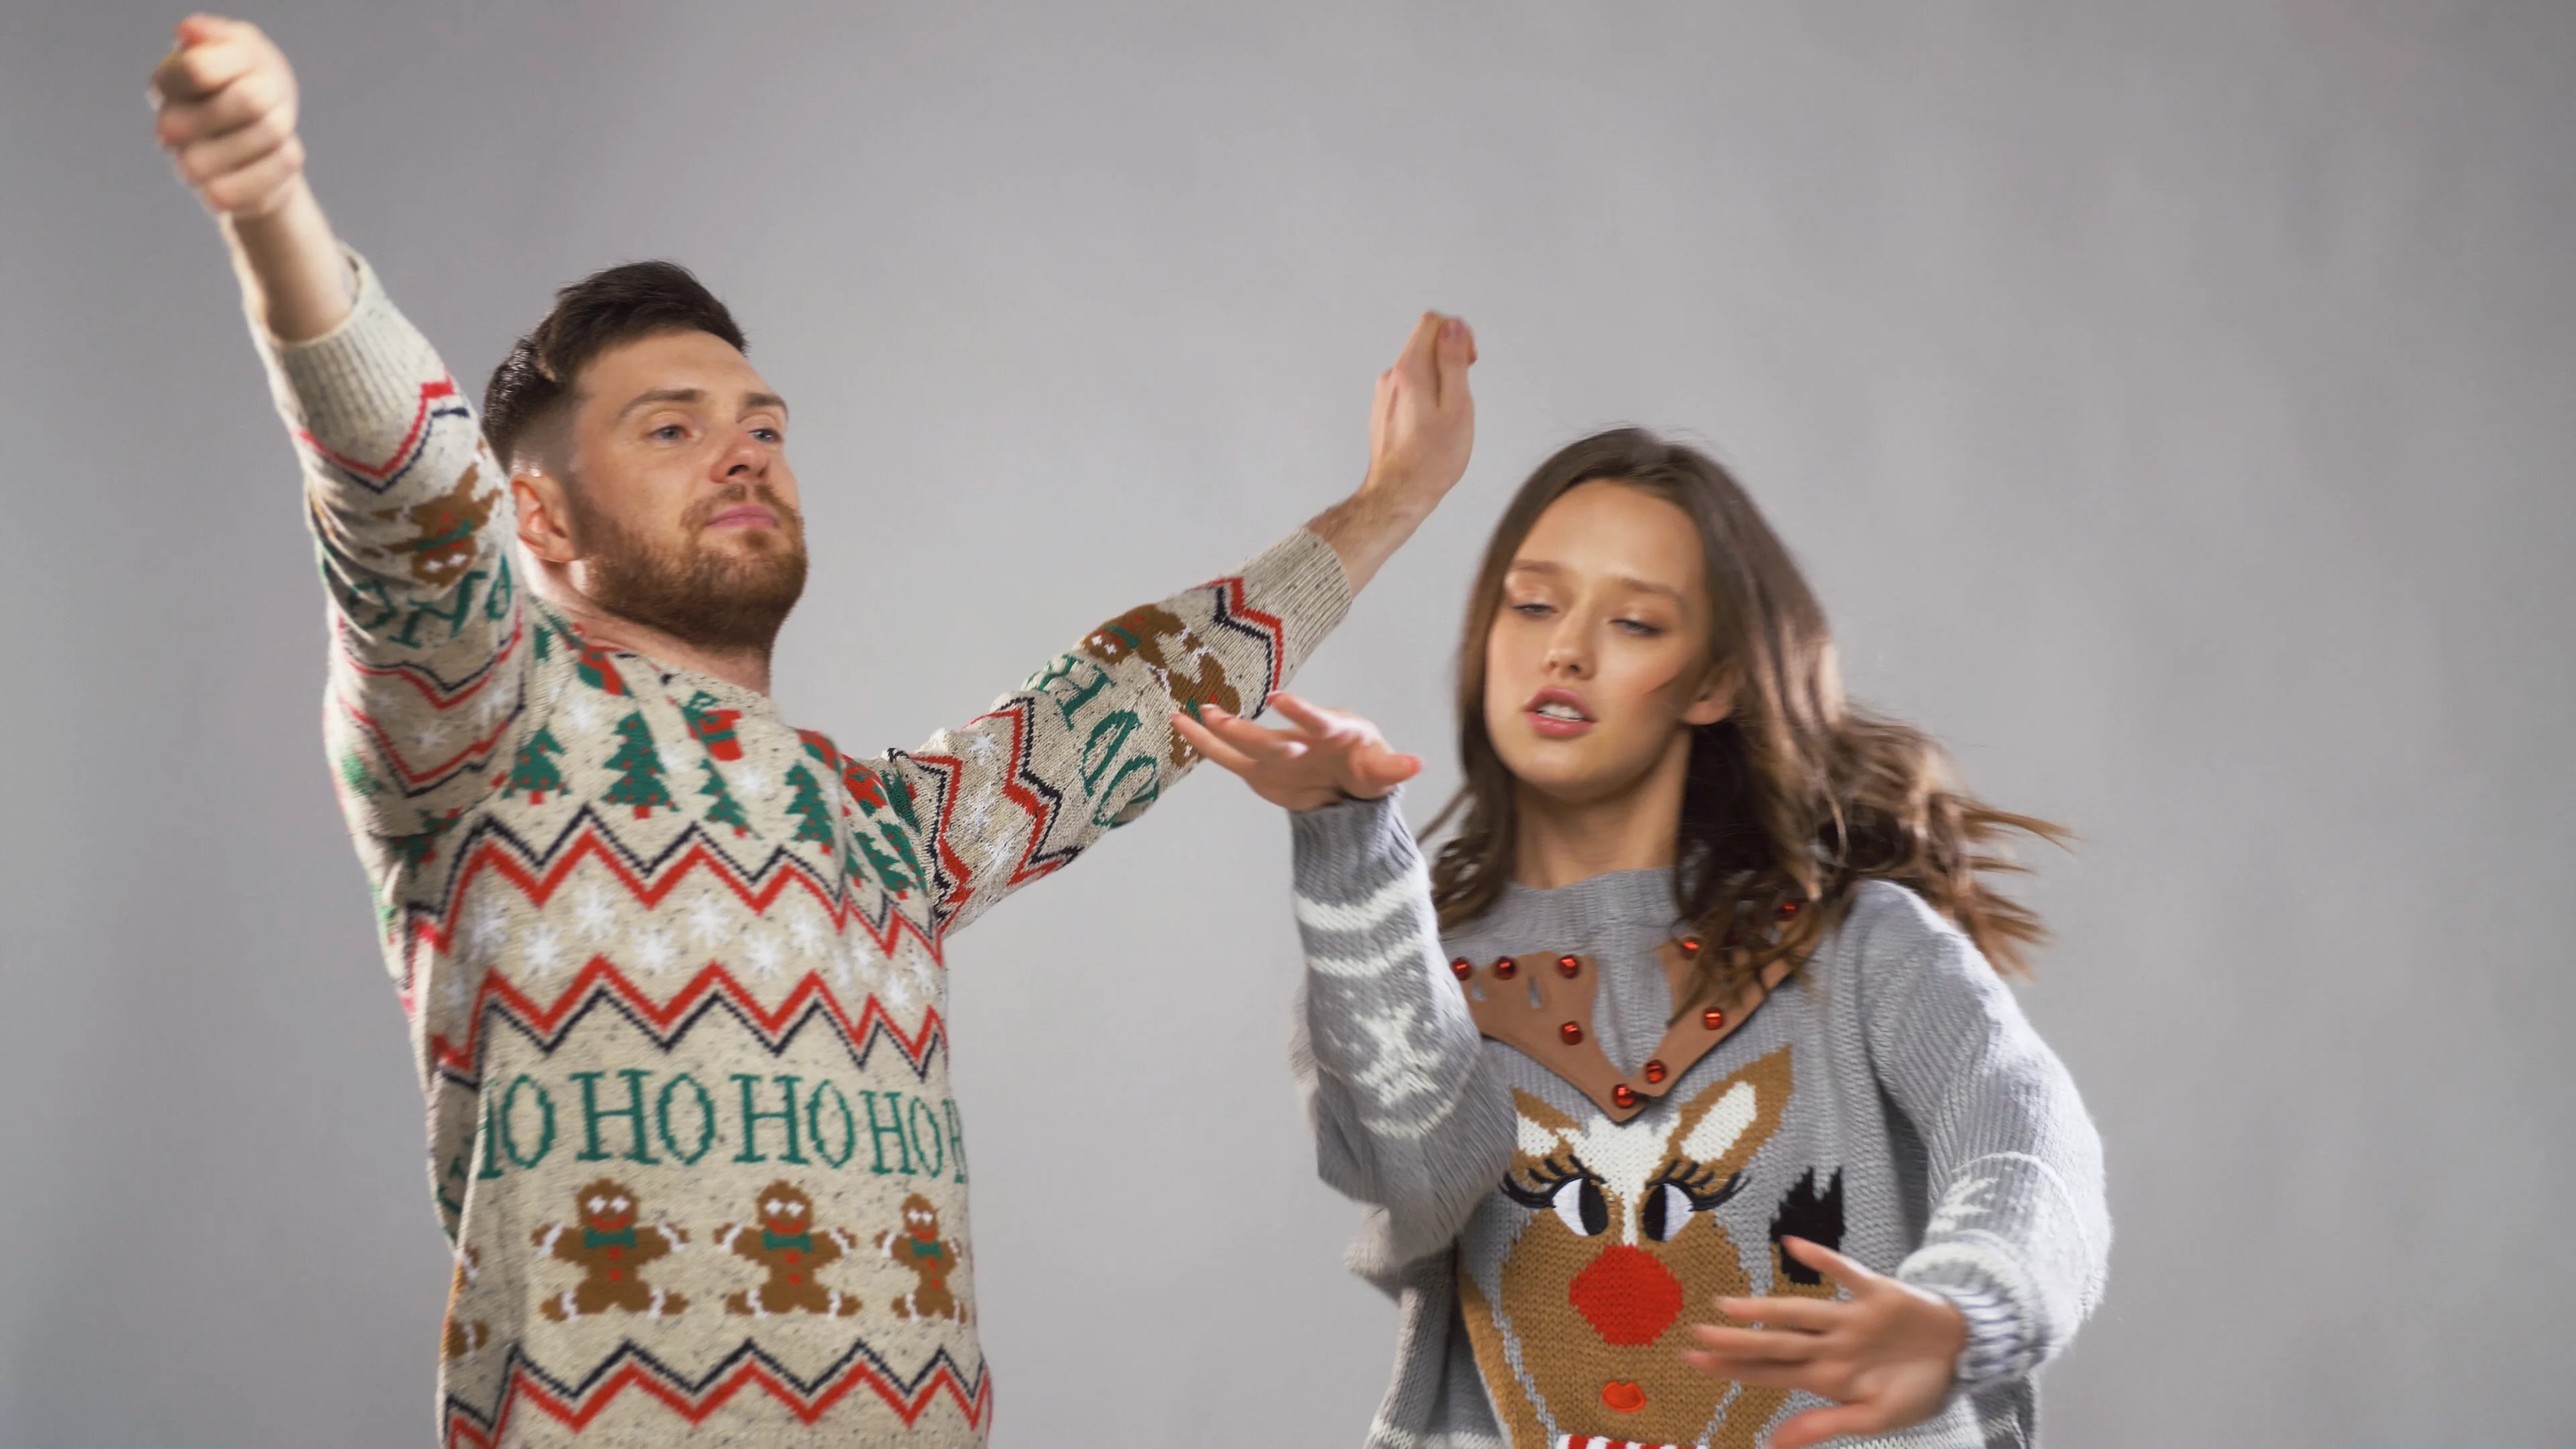 The Ugly Holiday Sweater Band - I Melt With You (13-Dec-19) on Vimeo